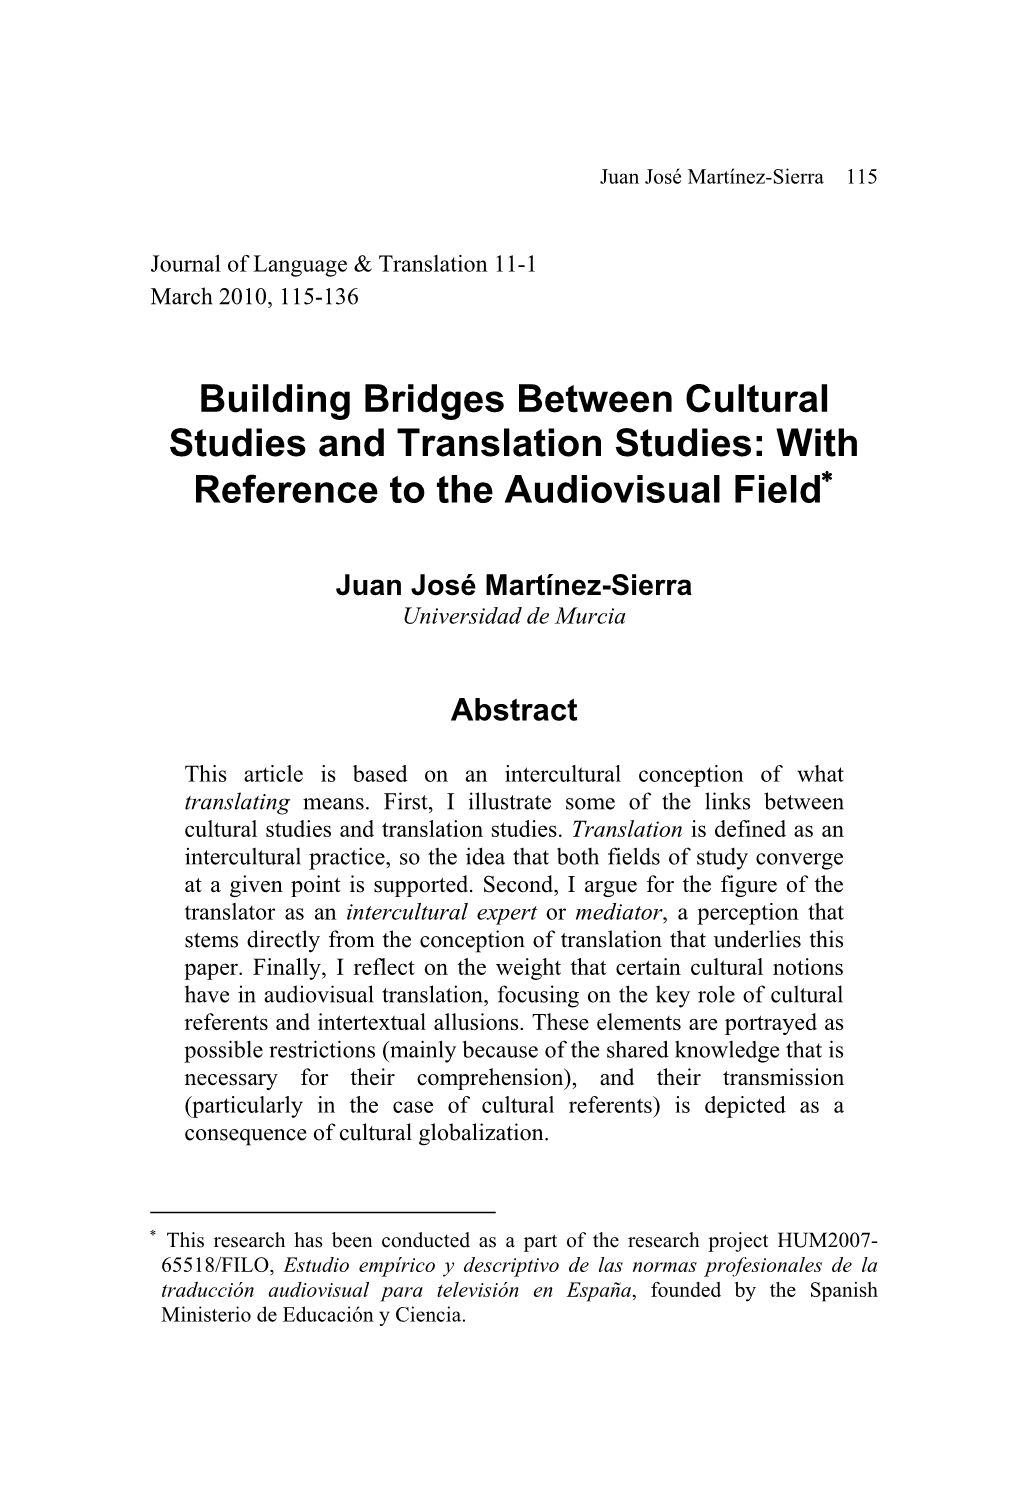 Building Bridges Between Cultural Studies and Translation Studies: with Reference to the Audiovisual Field∗